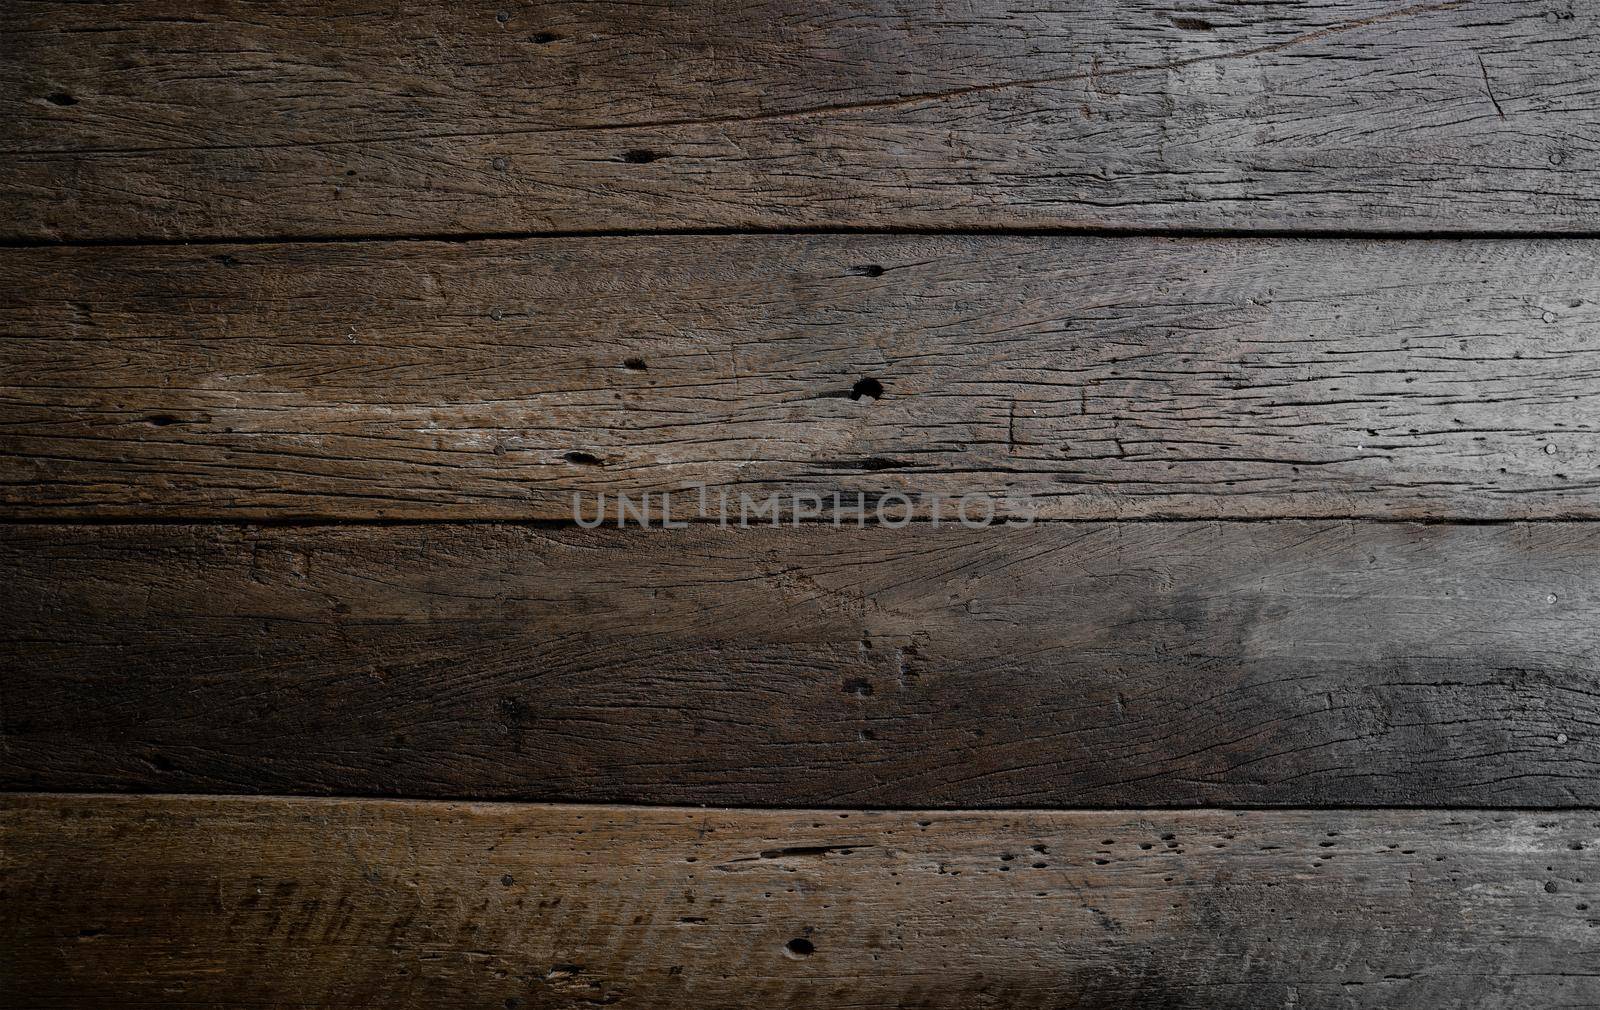 Wooden texture and copy space for background.